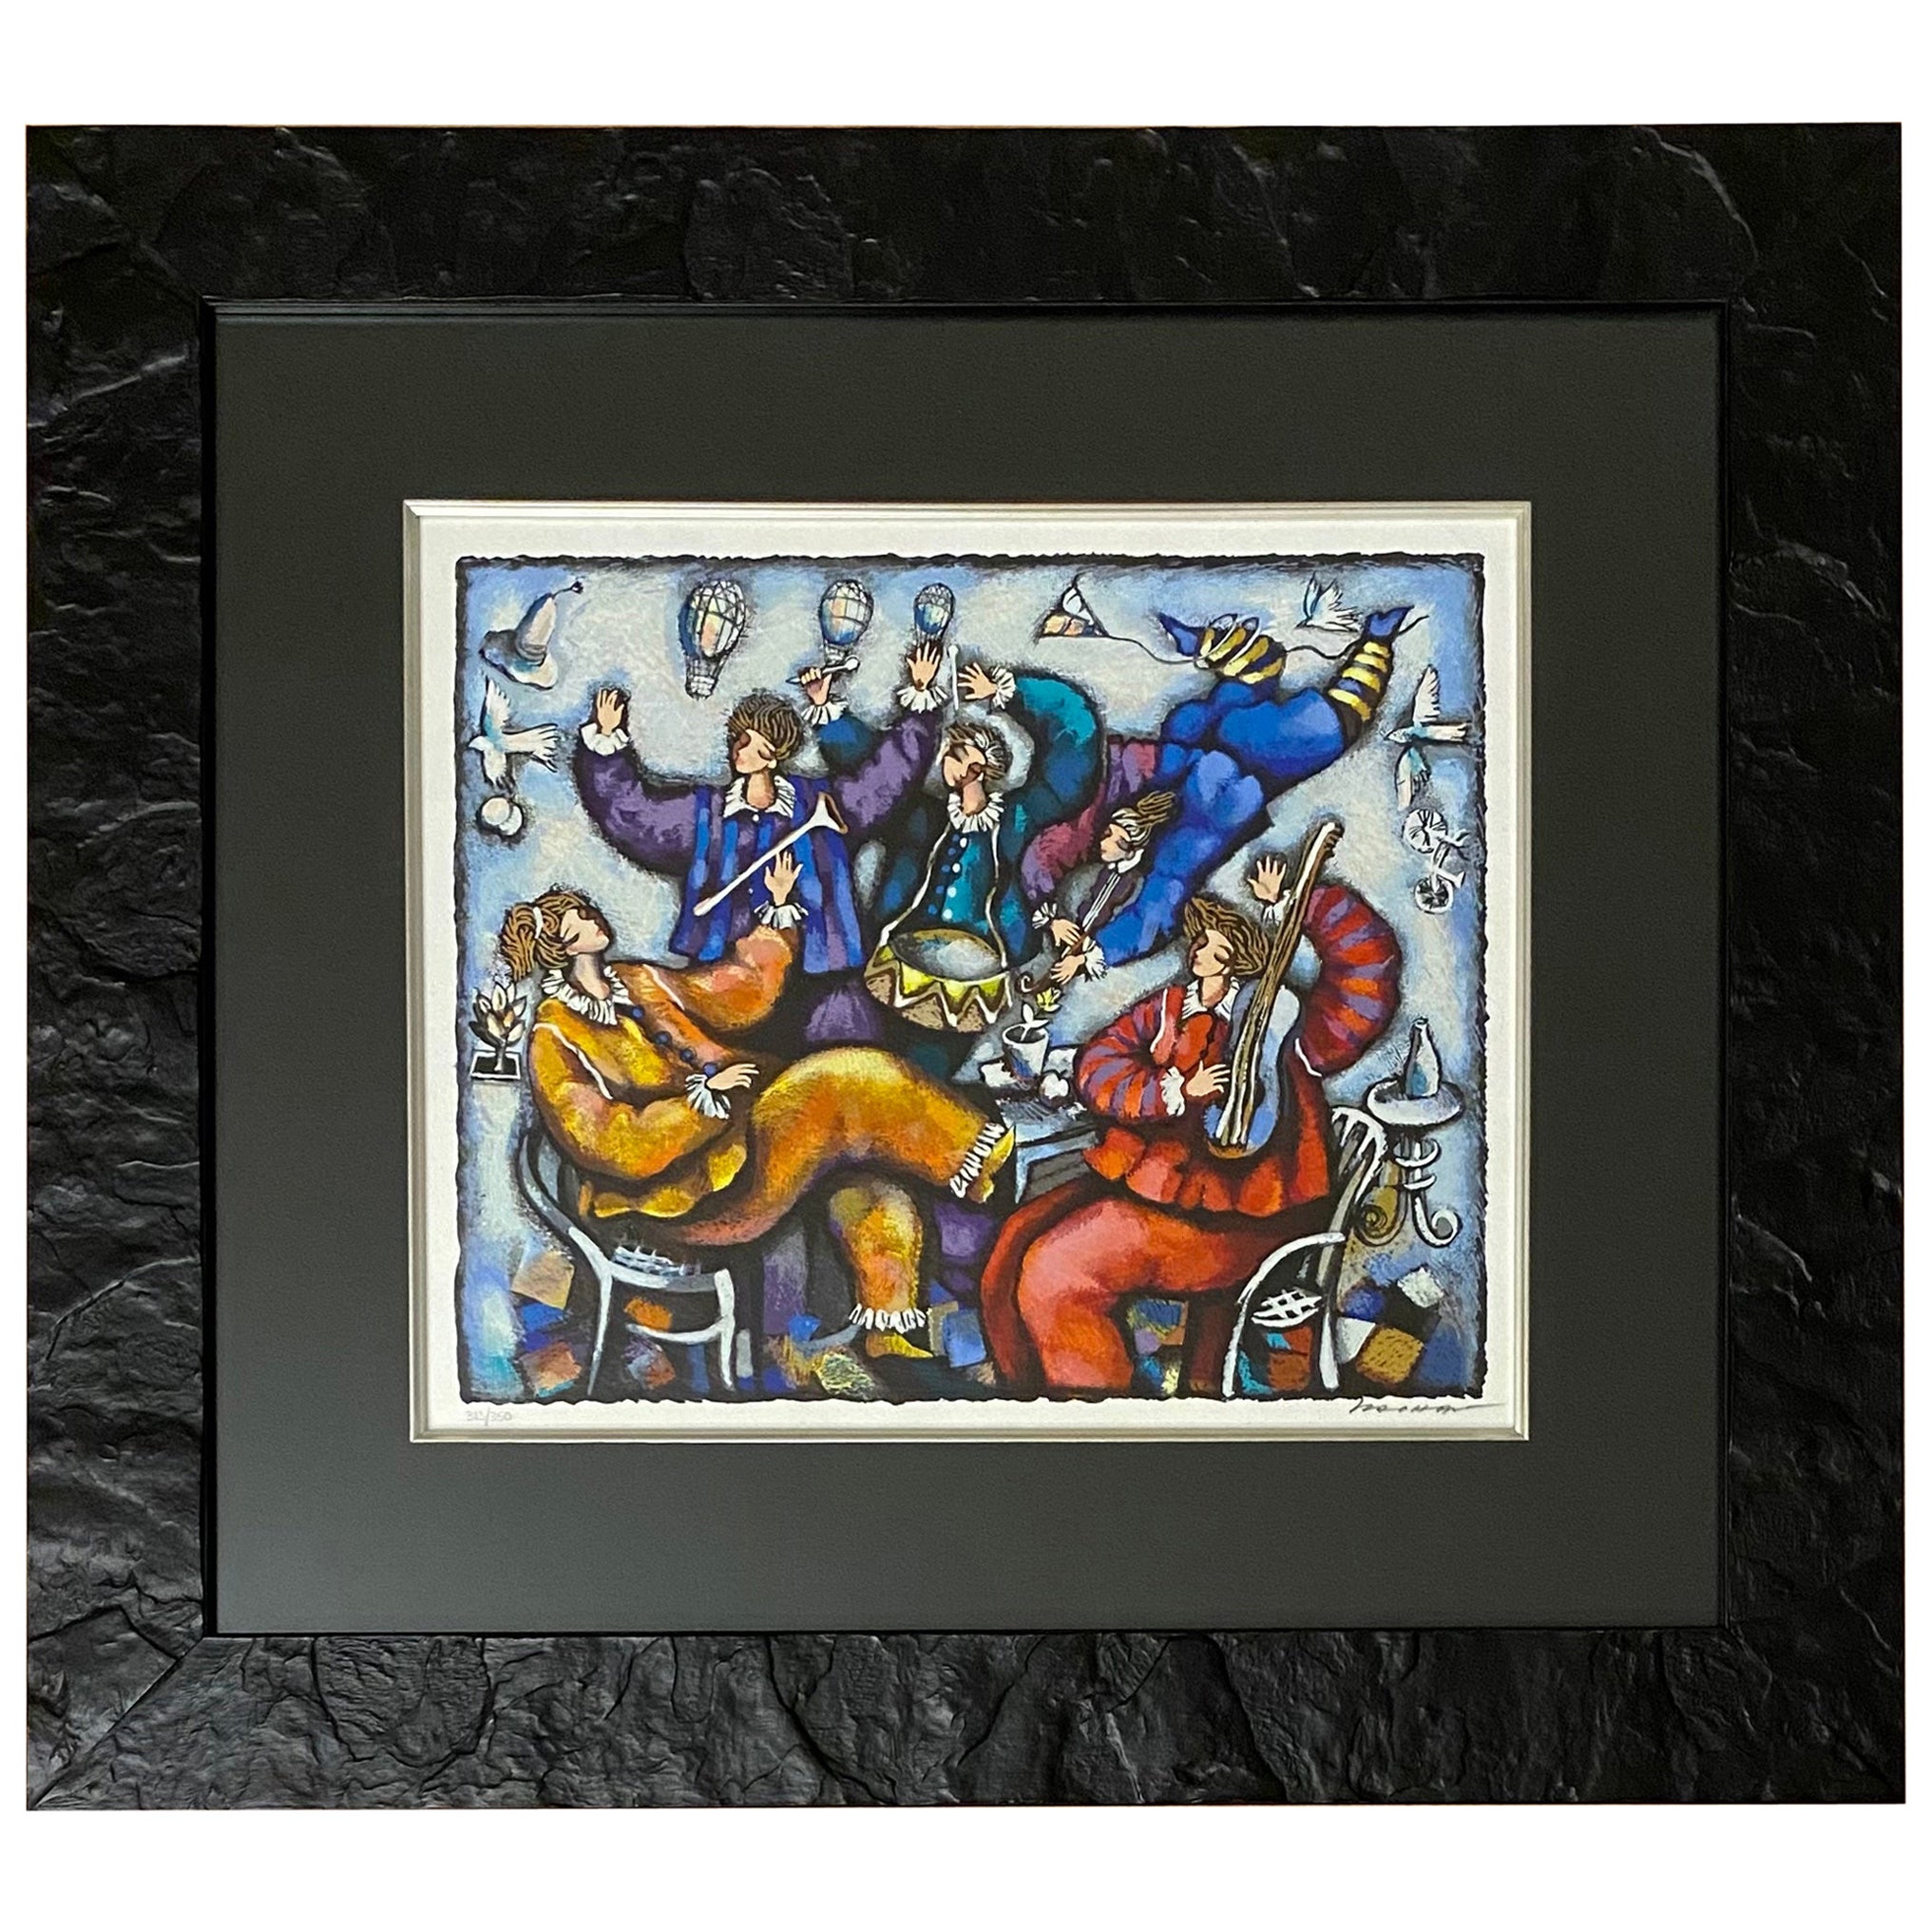 Michael Kachan Color Lithograph depicts Music and Happy Hour